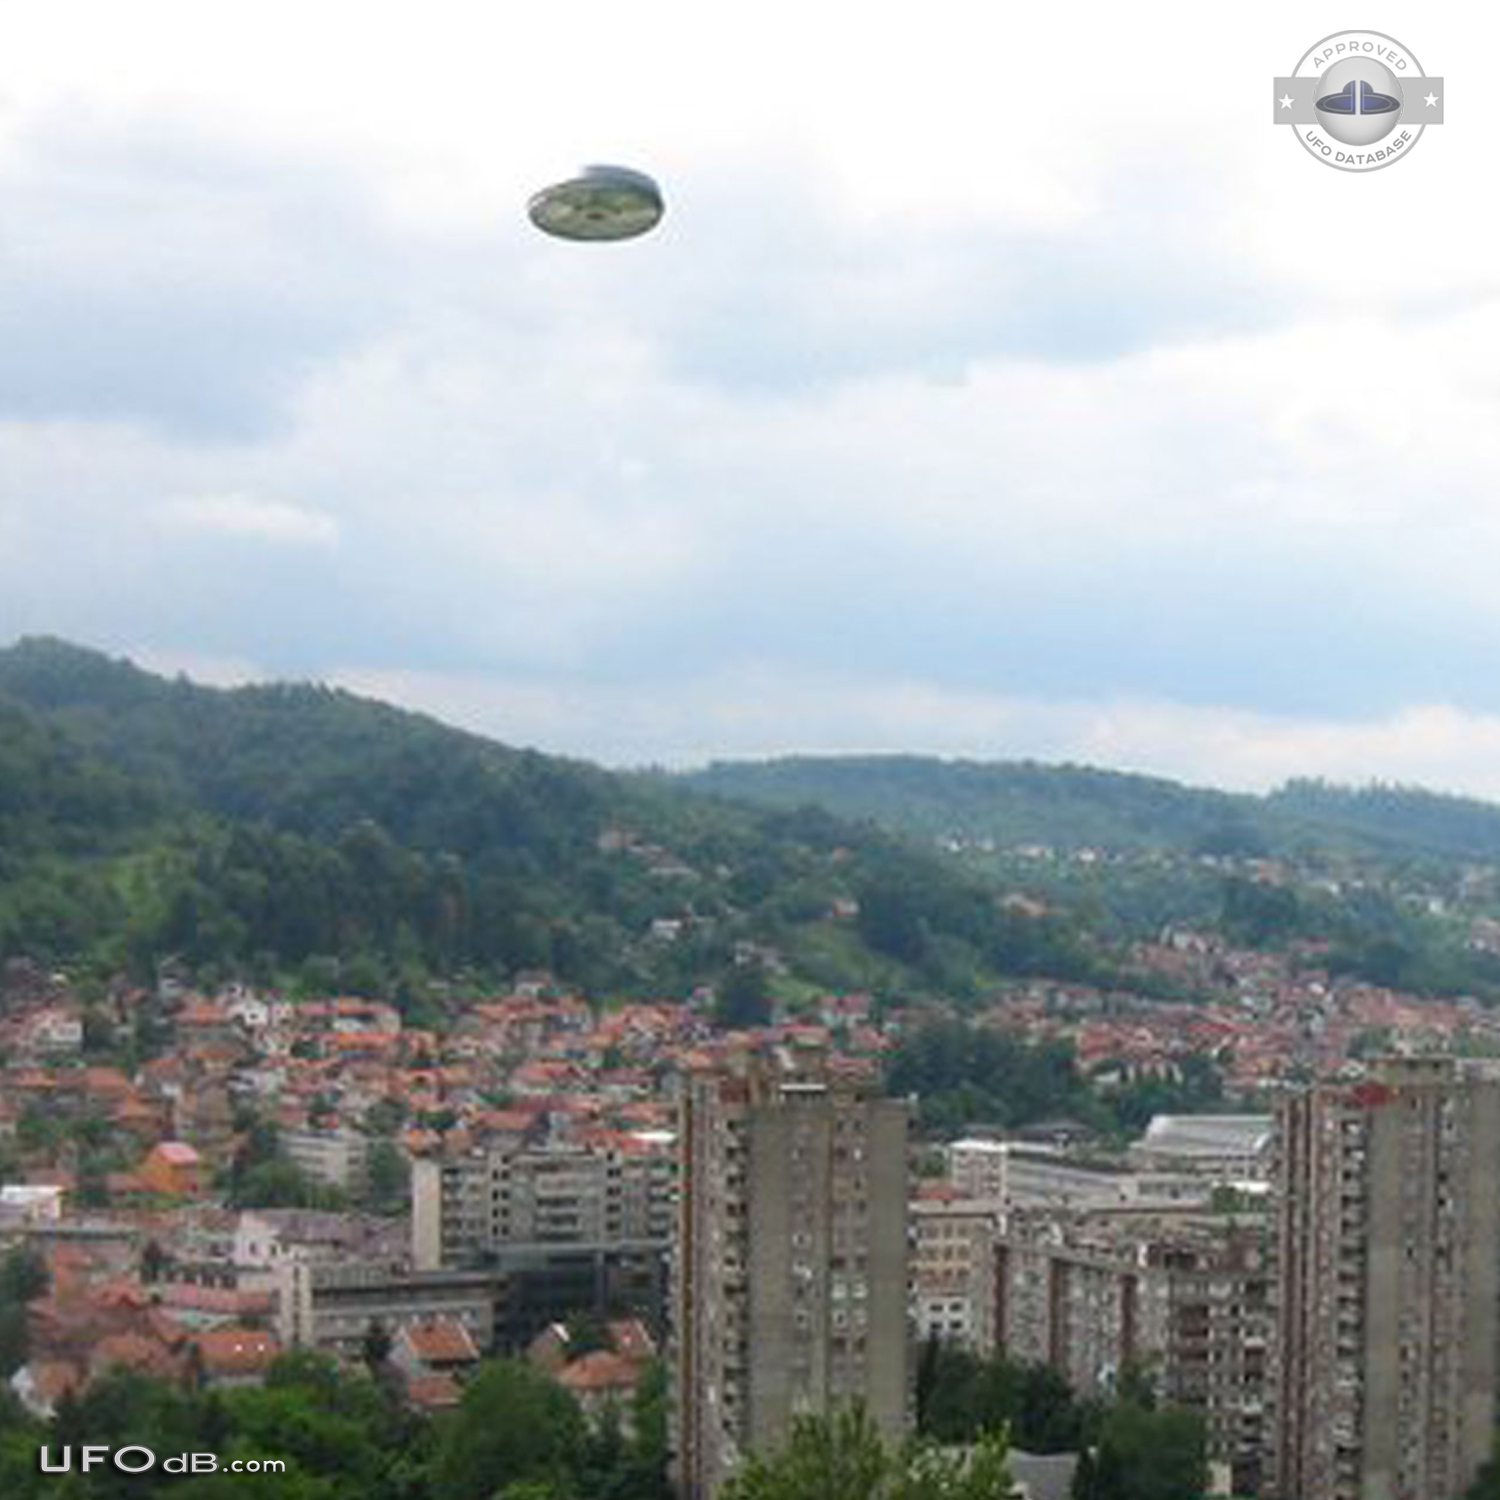 Cylinder UFO appear with a Flash but caught on picture - Tuzla Bosnia UFO Picture #532-2